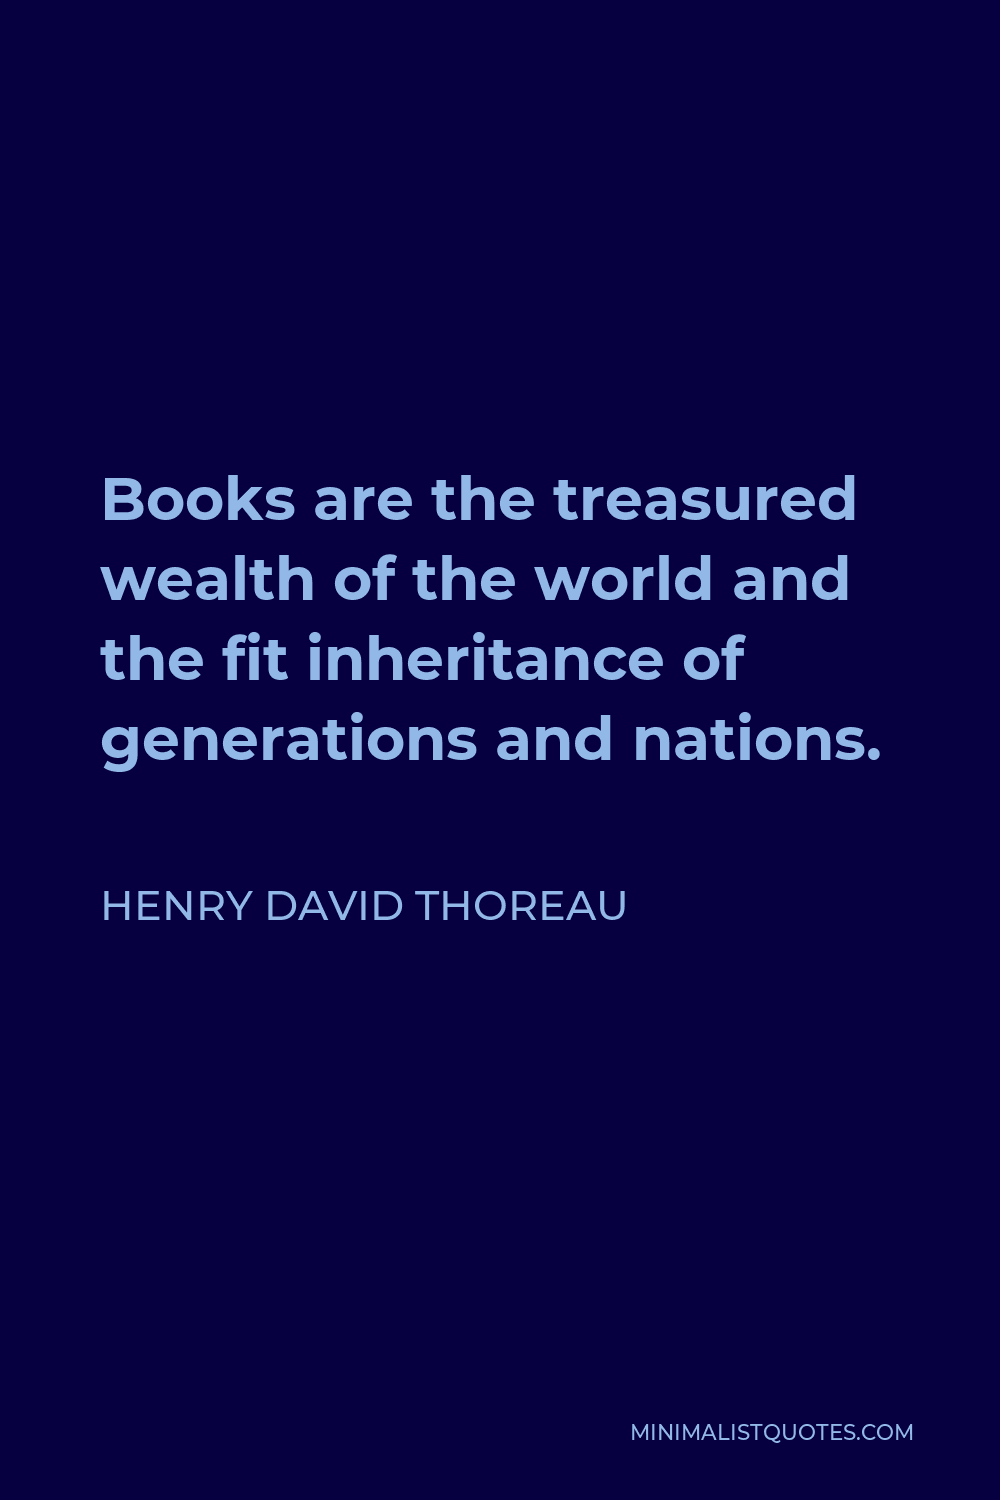 Henry David Thoreau Quote - Books are the treasured wealth of the world and the fit inheritance of generations and nations.